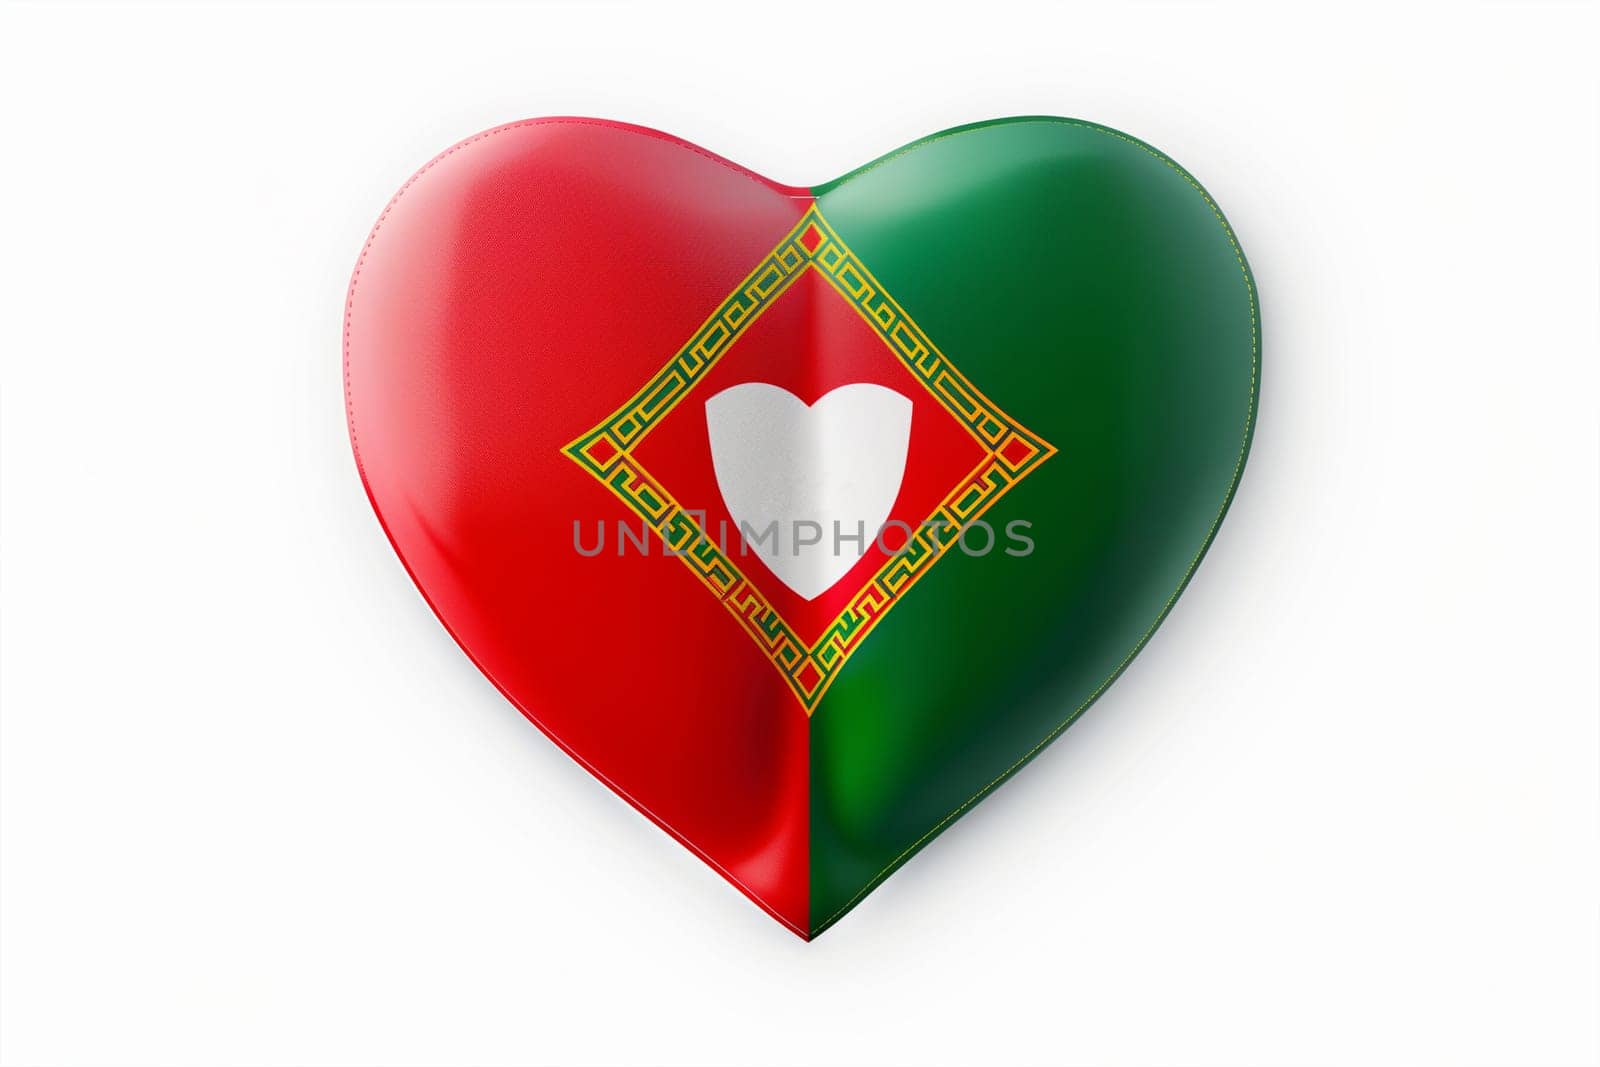 Heart Shaped Object With Portuguese Flag by Sd28DimoN_1976